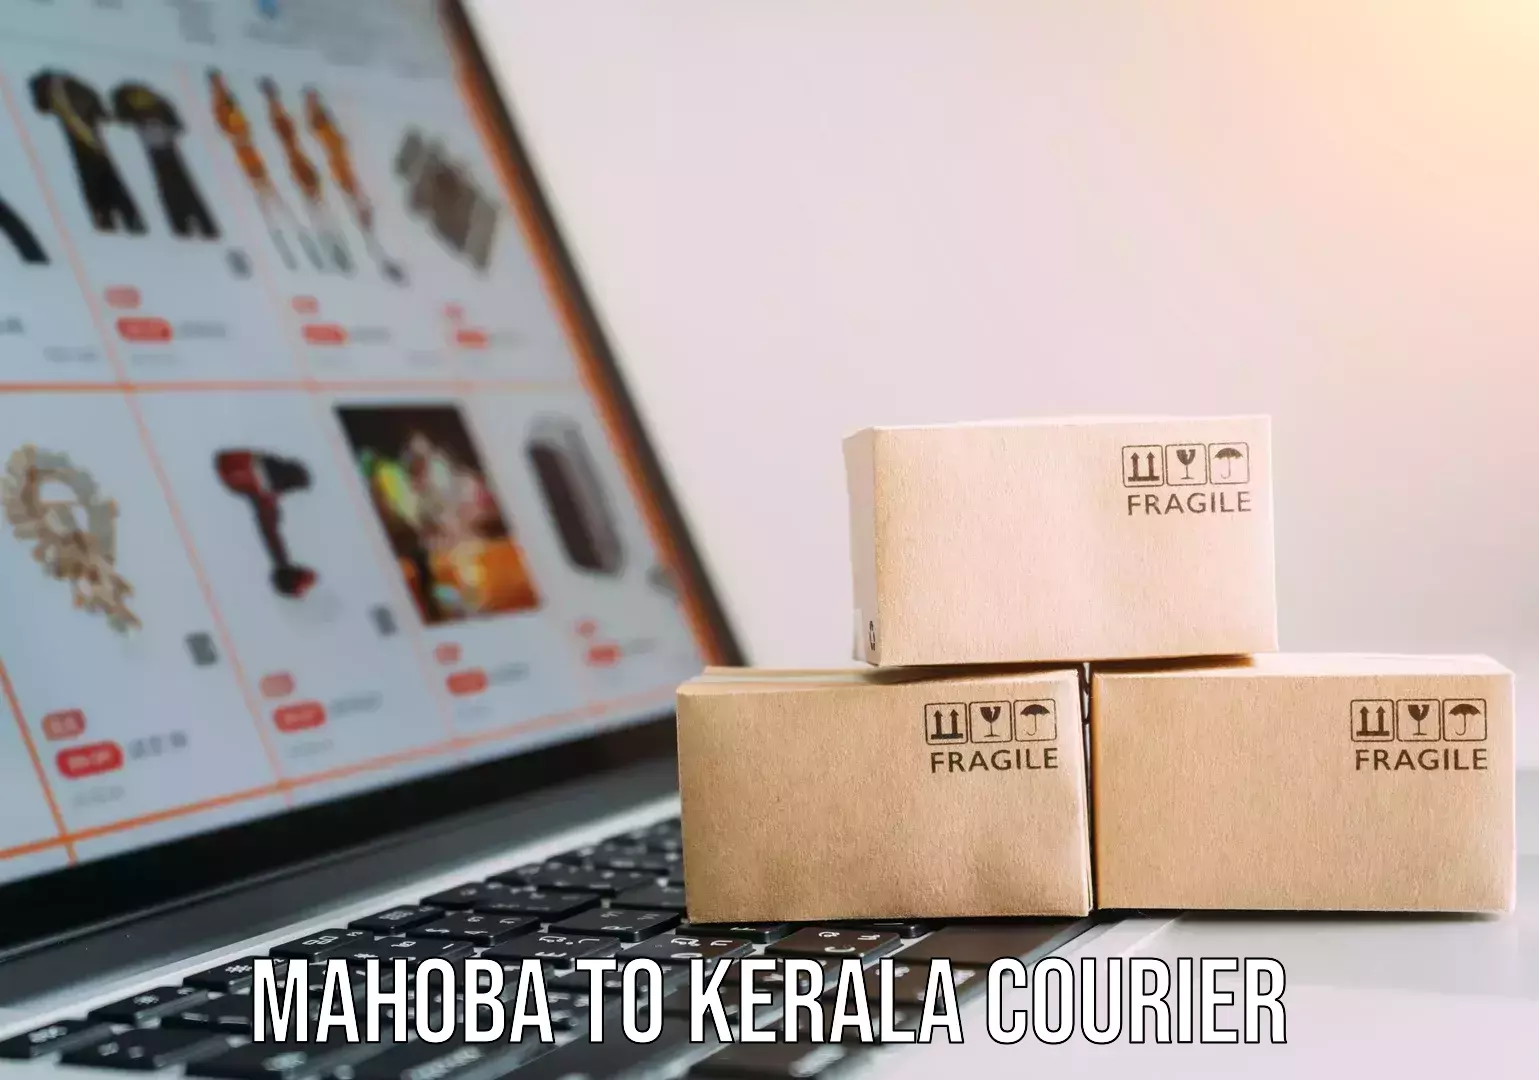 Moving service excellence Mahoba to Kerala